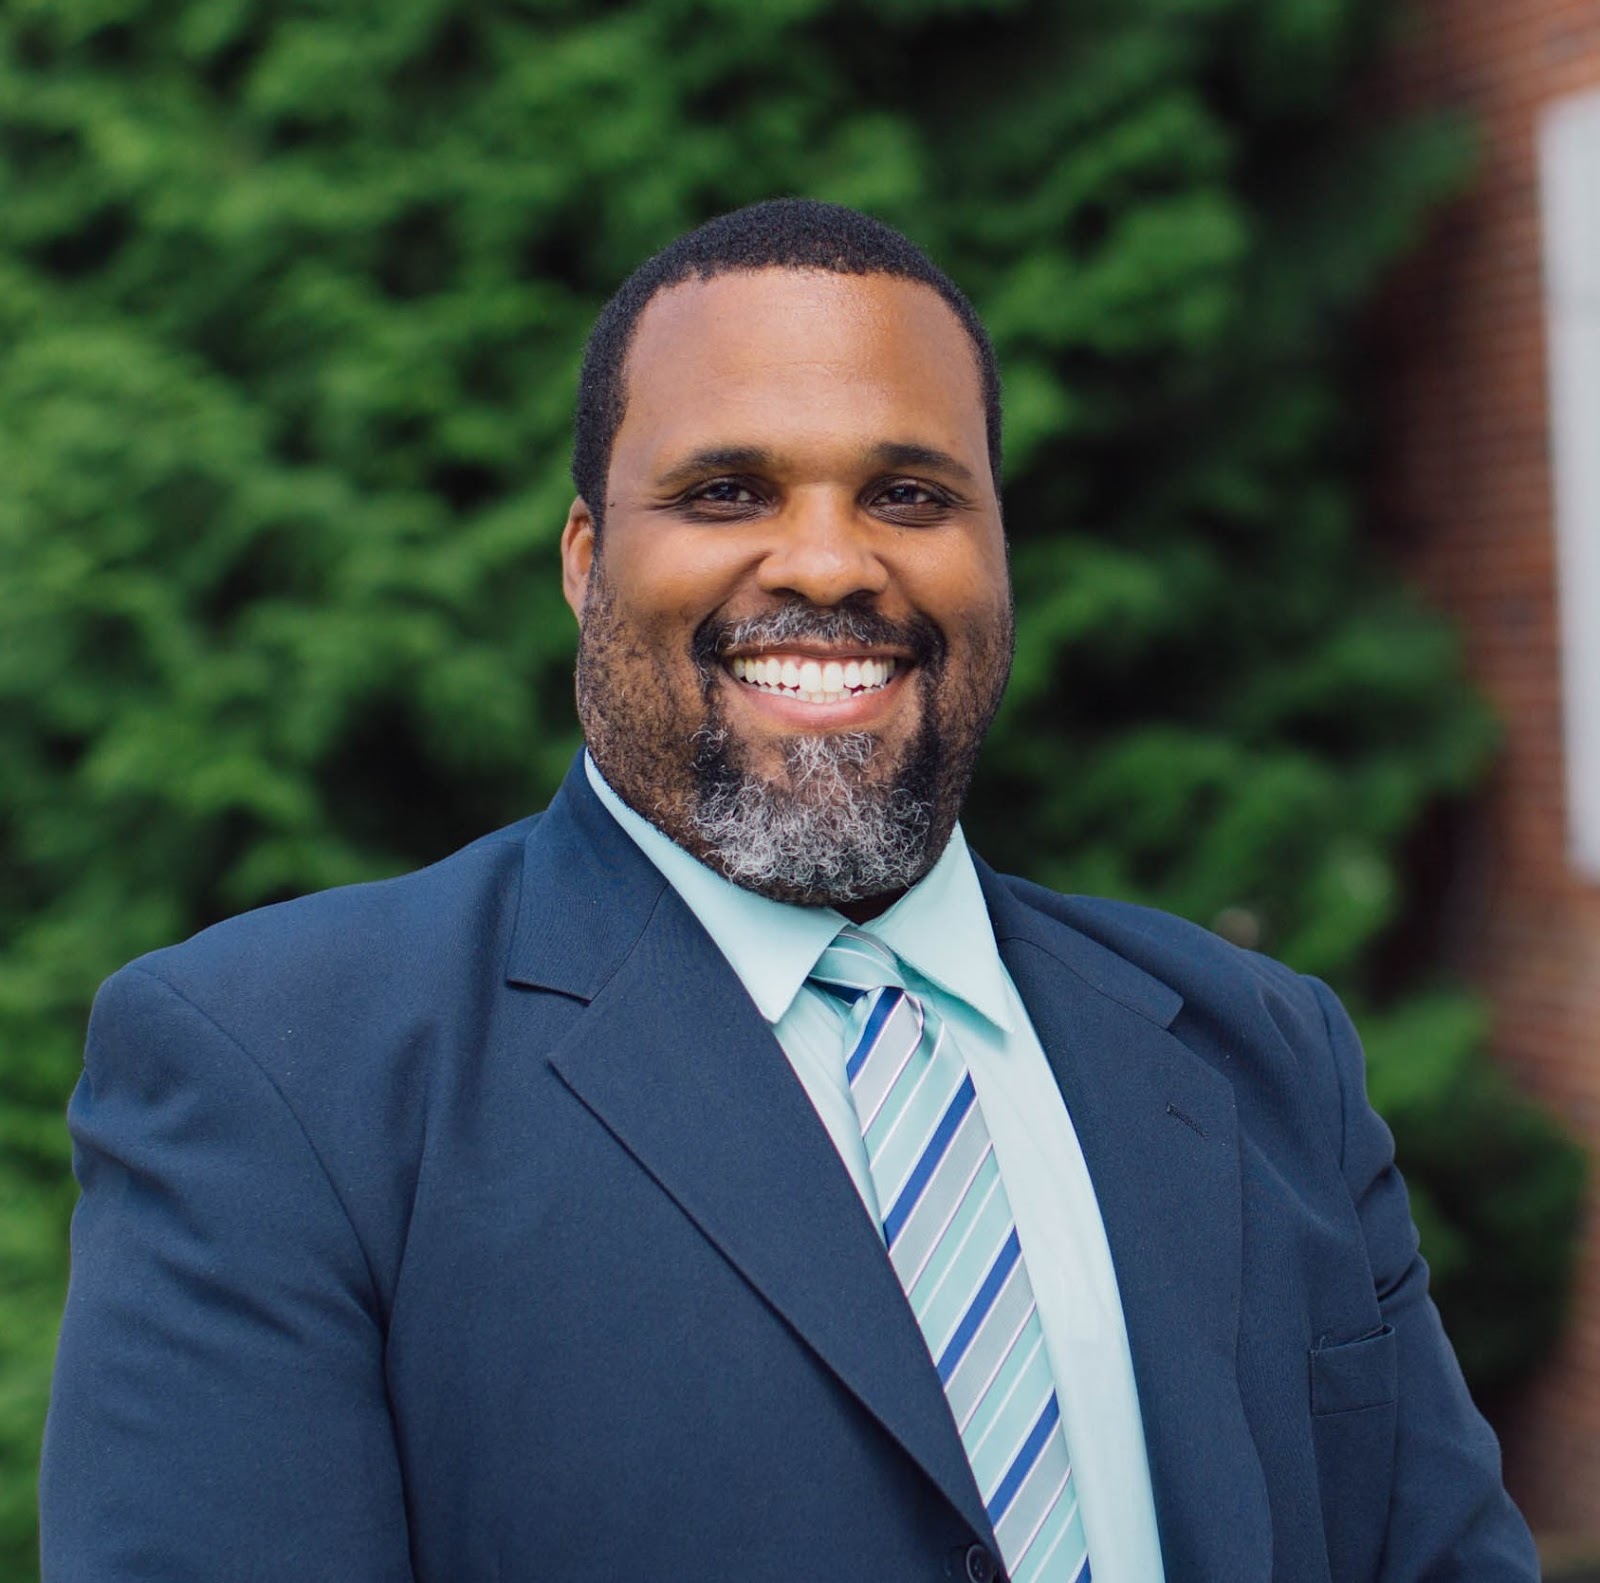 Interim Chief Diversity Officer and Assistant Secretary to the Board of Trustees Darrien Davenport (Photo provided)